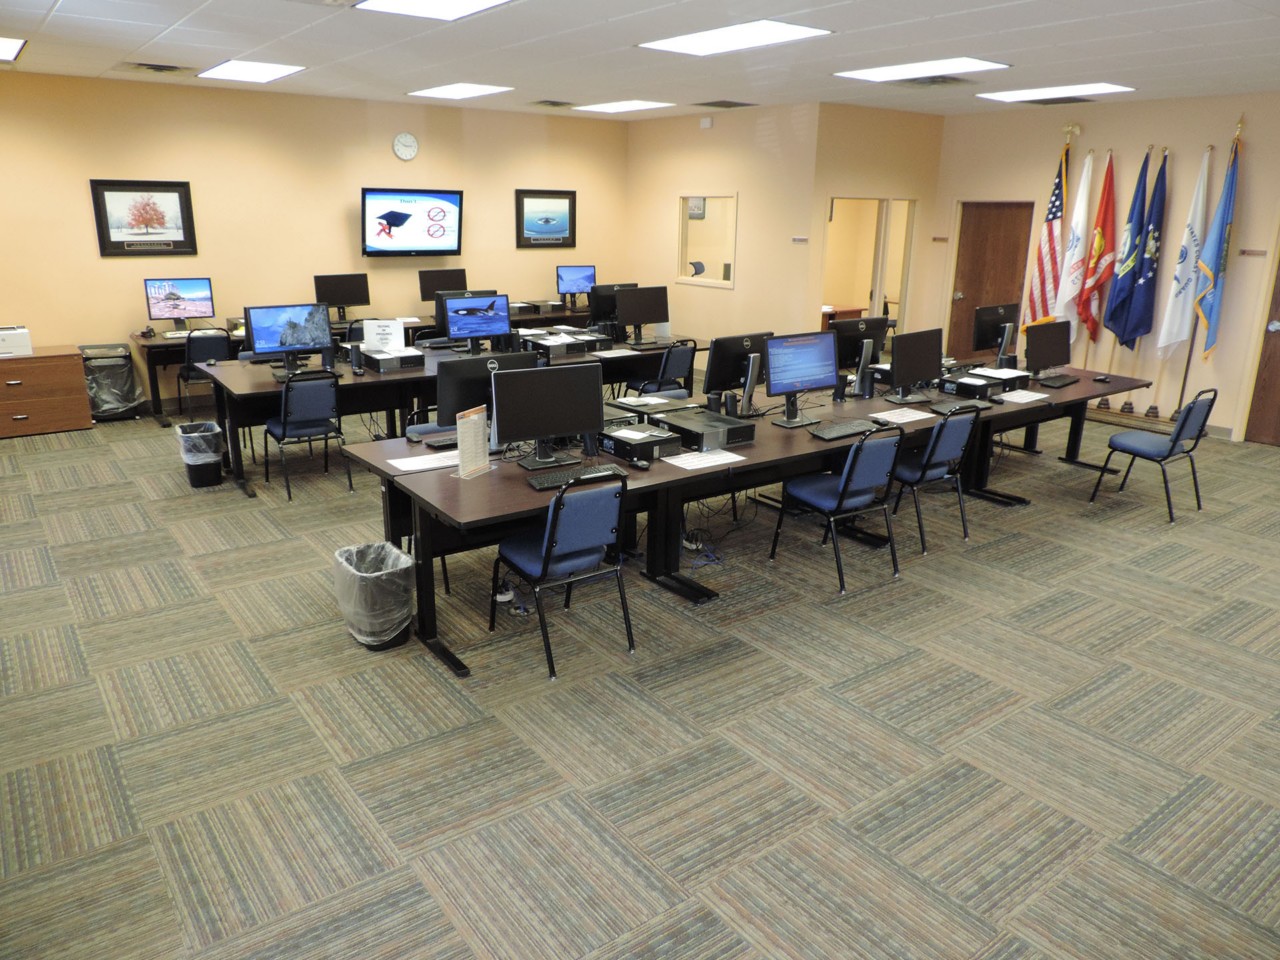 Resource area with computers and a printer/scanner/fax available to the public.